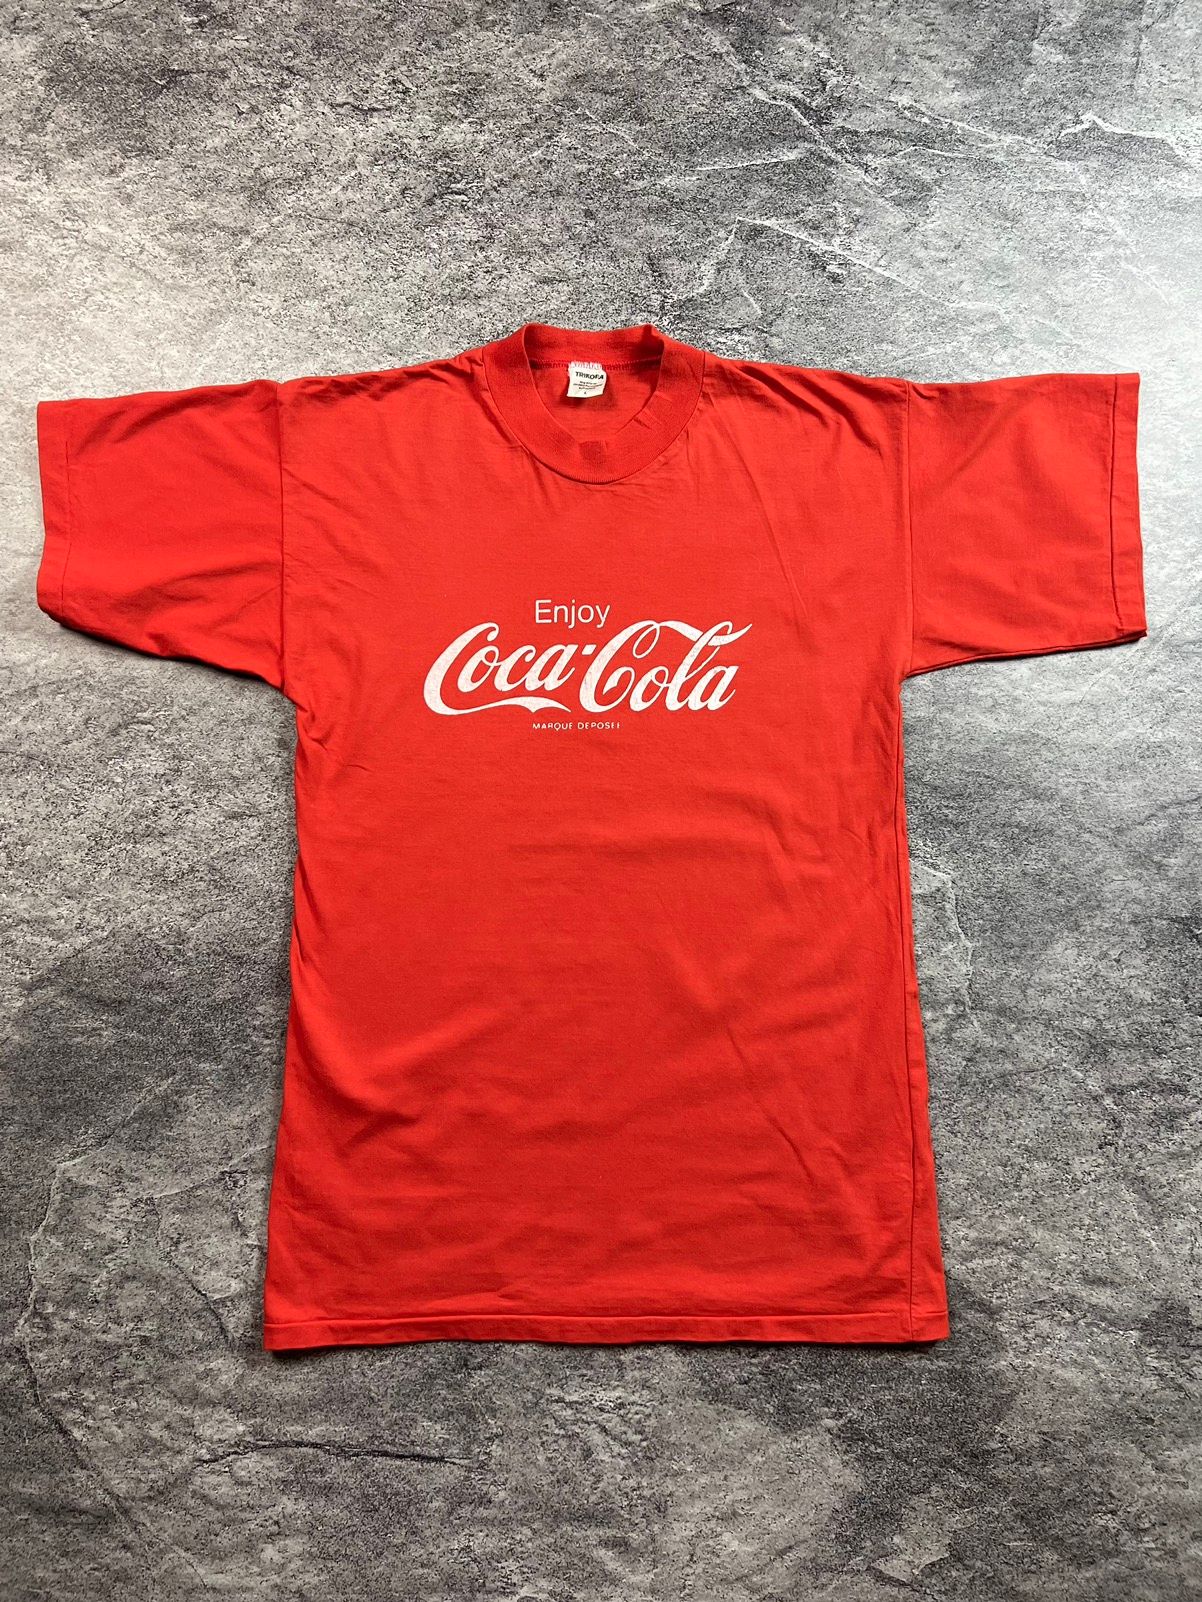 Pre-owned Coca Cola X Vintage 90's Single Stitch Enjoy Coca Cola Archival Japan Style Tee In Red